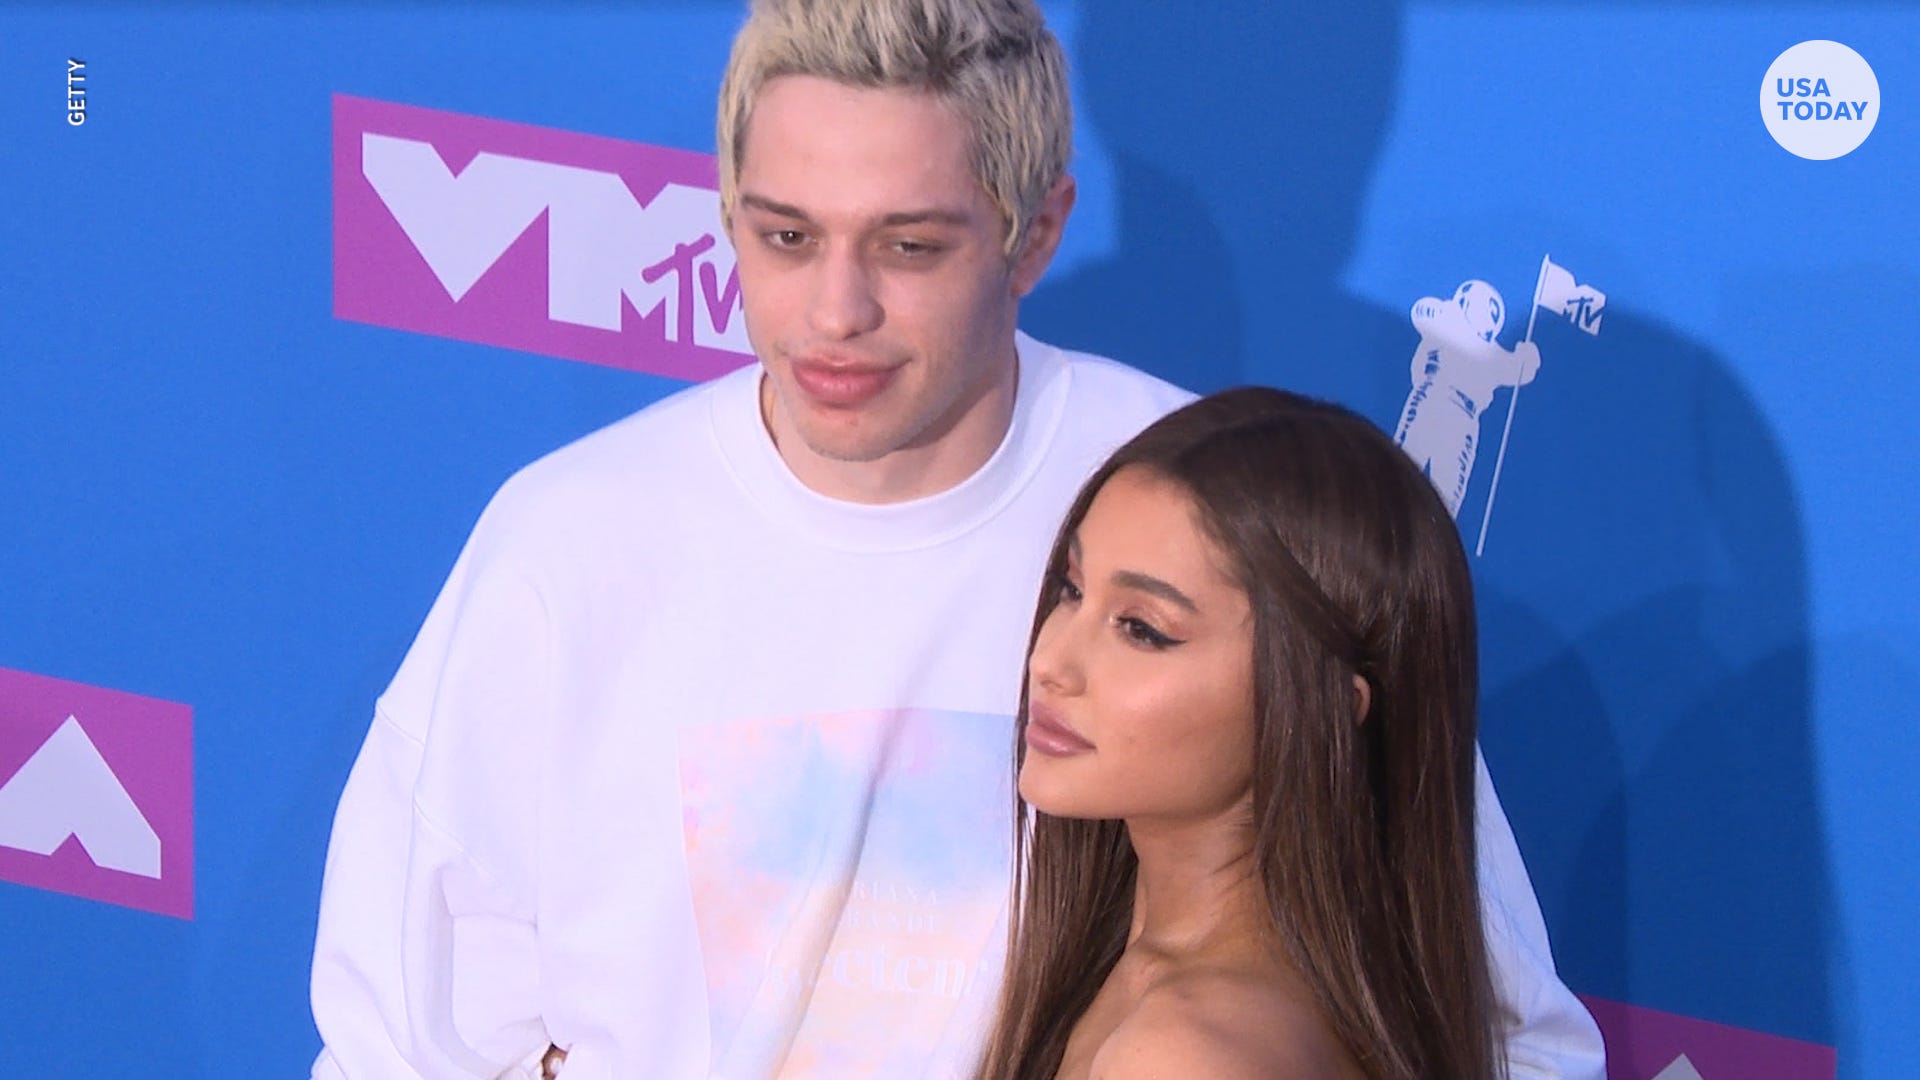 Arianaographic Actress - Ariana Grande claps back at Pete Davidson's 'SNL' proposal